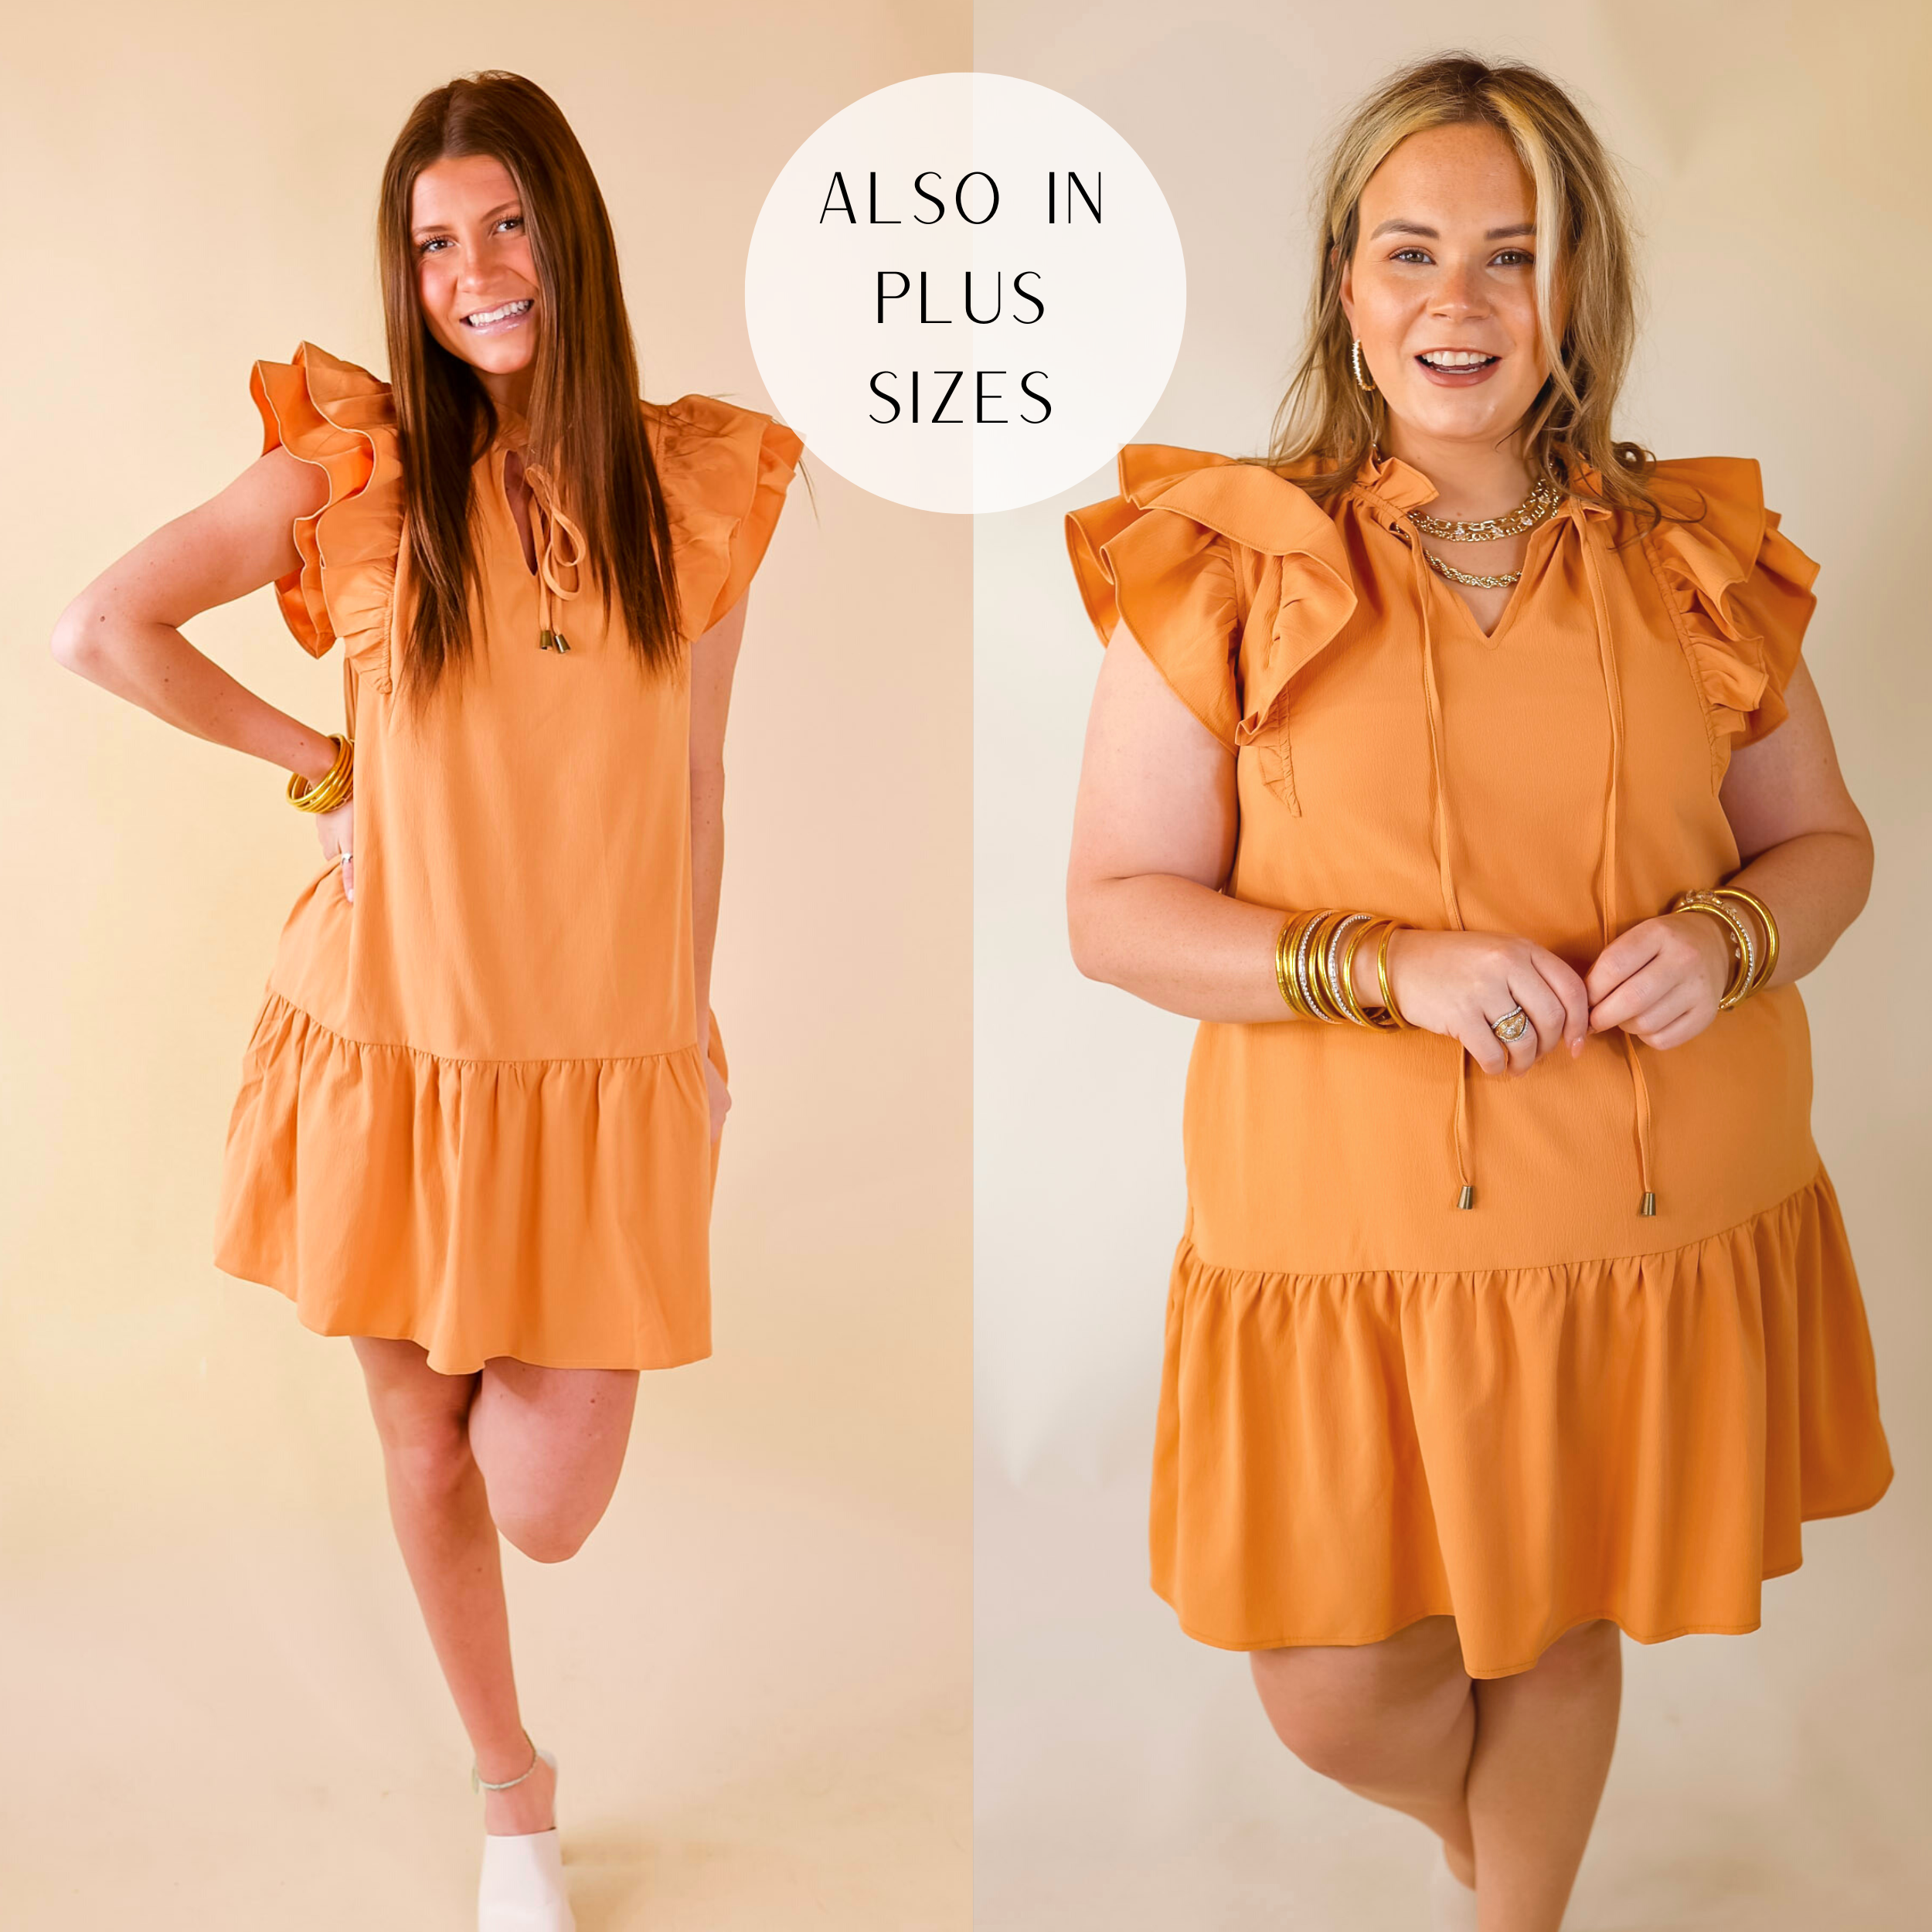 A relaxed fit pastel orange mini dress with a unique tieable keyhole neckline, short ruffled sleeves, and a ruffled hem. Item is pictured on a pale pink background.